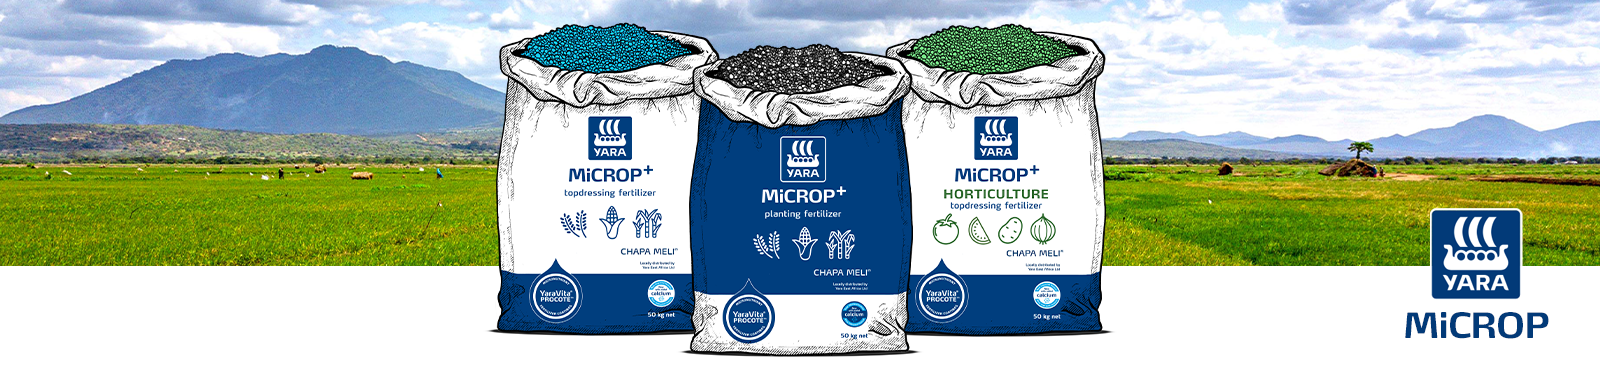 Yara MiCROP and Horticulture